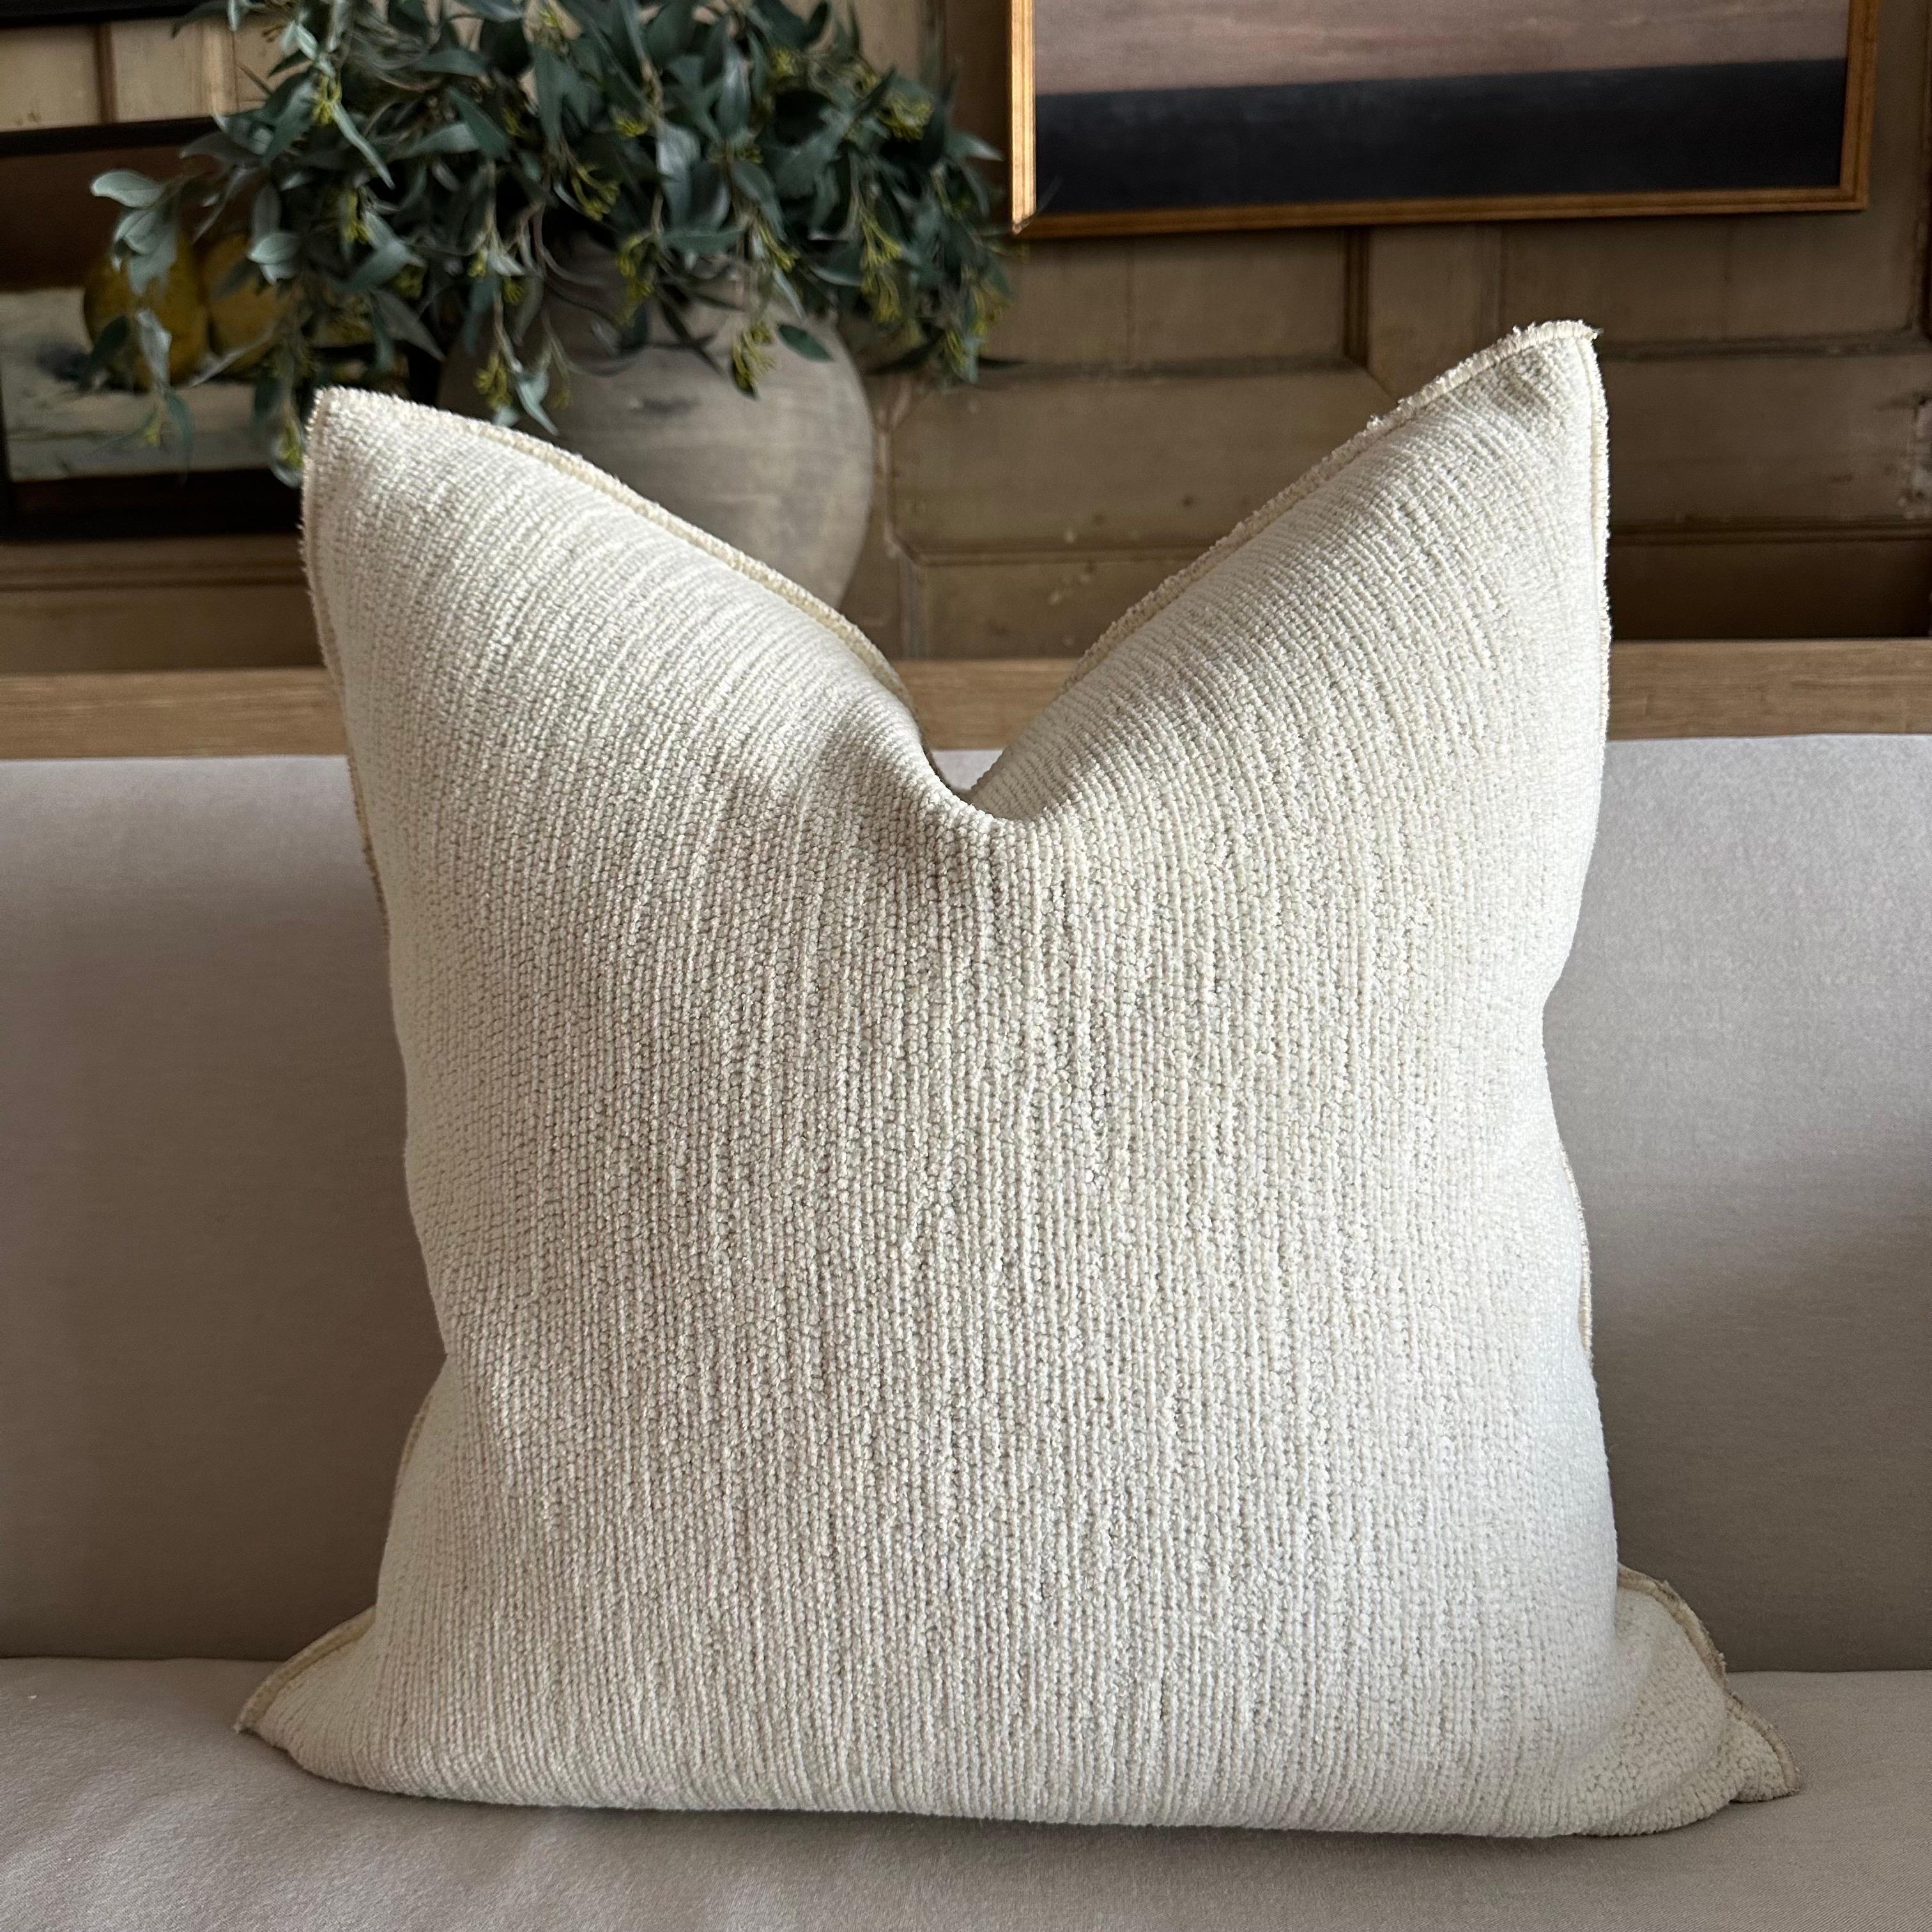 MDV Toile Tuftée Upcyclée 
Color: Créme
A beautiful wool cotton and linen blend accent pillow. 
Soft touch, creamy, velvety feel.
These pillows are crafted from a luxurious wool, cotton and linen blend, this throw pillow will bring a natural element